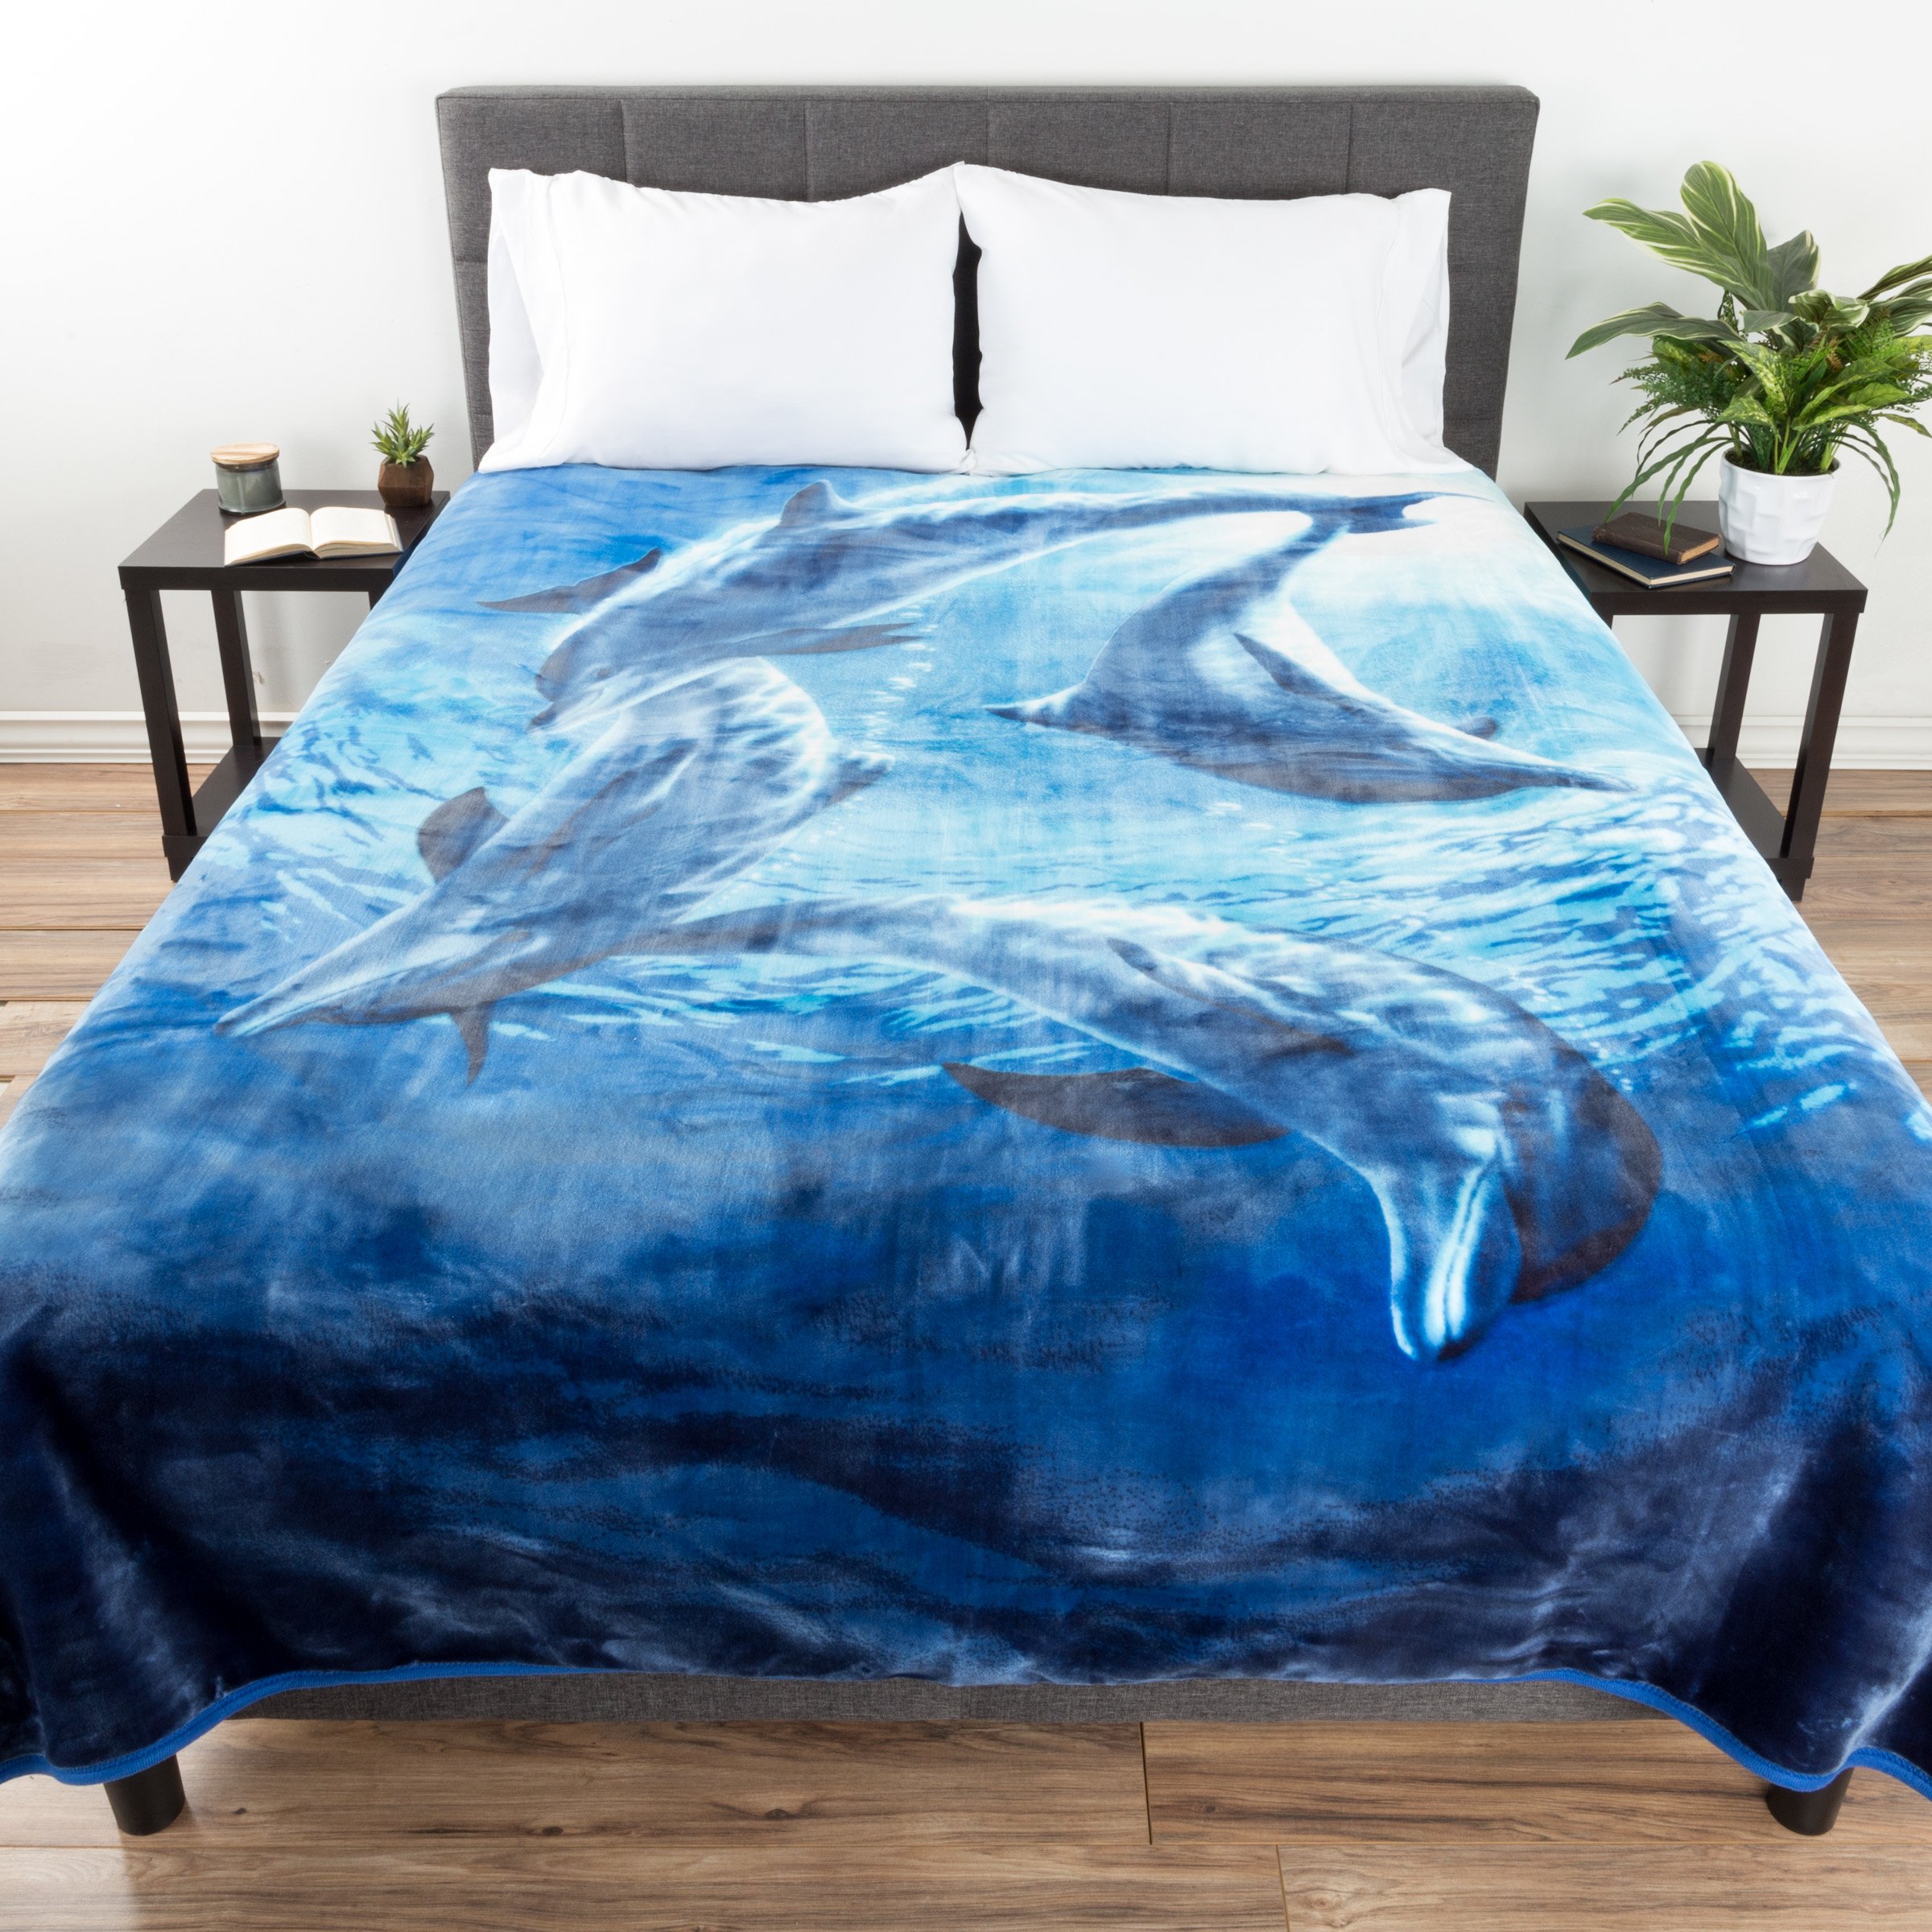 Full Queen Size Luxury Mink Blanket Dolphins Super Soft Fuzzy 74 X 91 Inch 7.5 Lbs